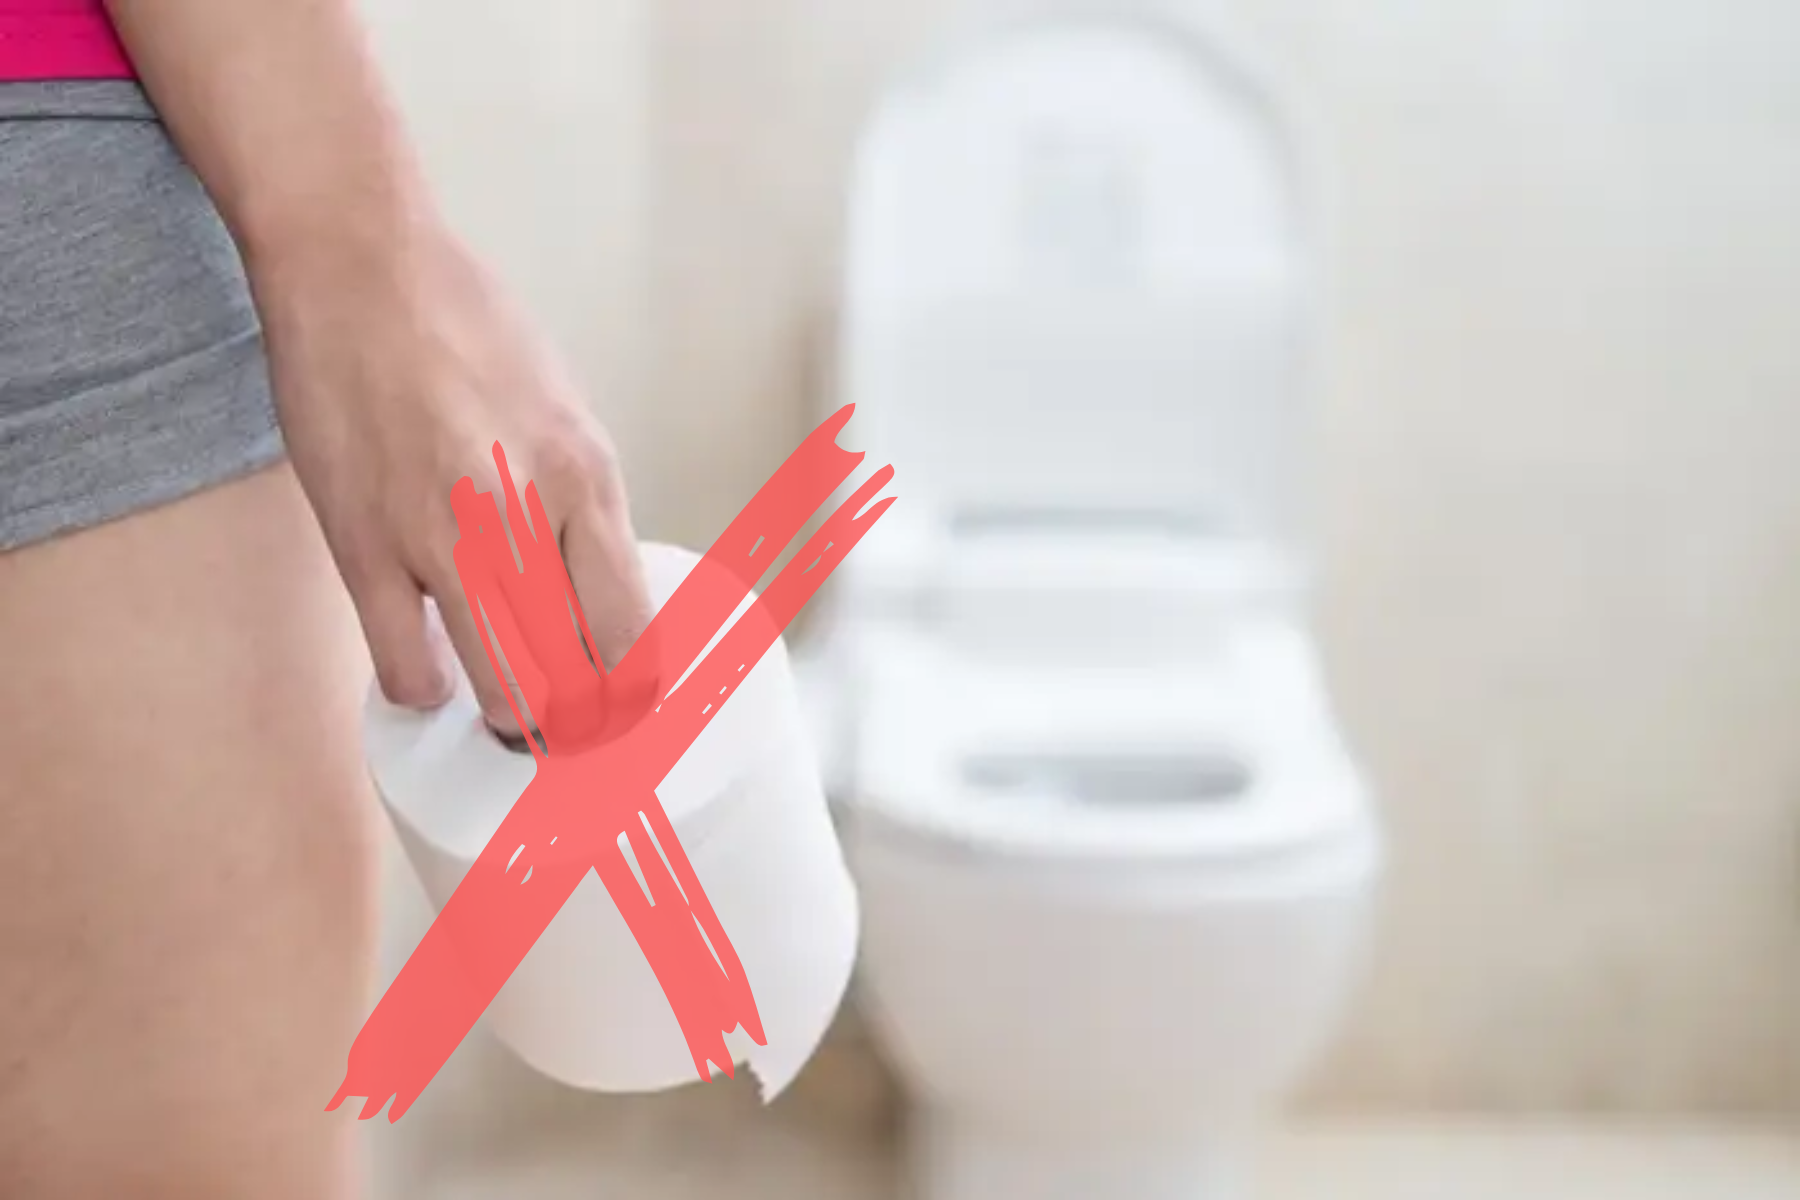 A woman is about to go a toilet while holding a scented tissue that has an X sign